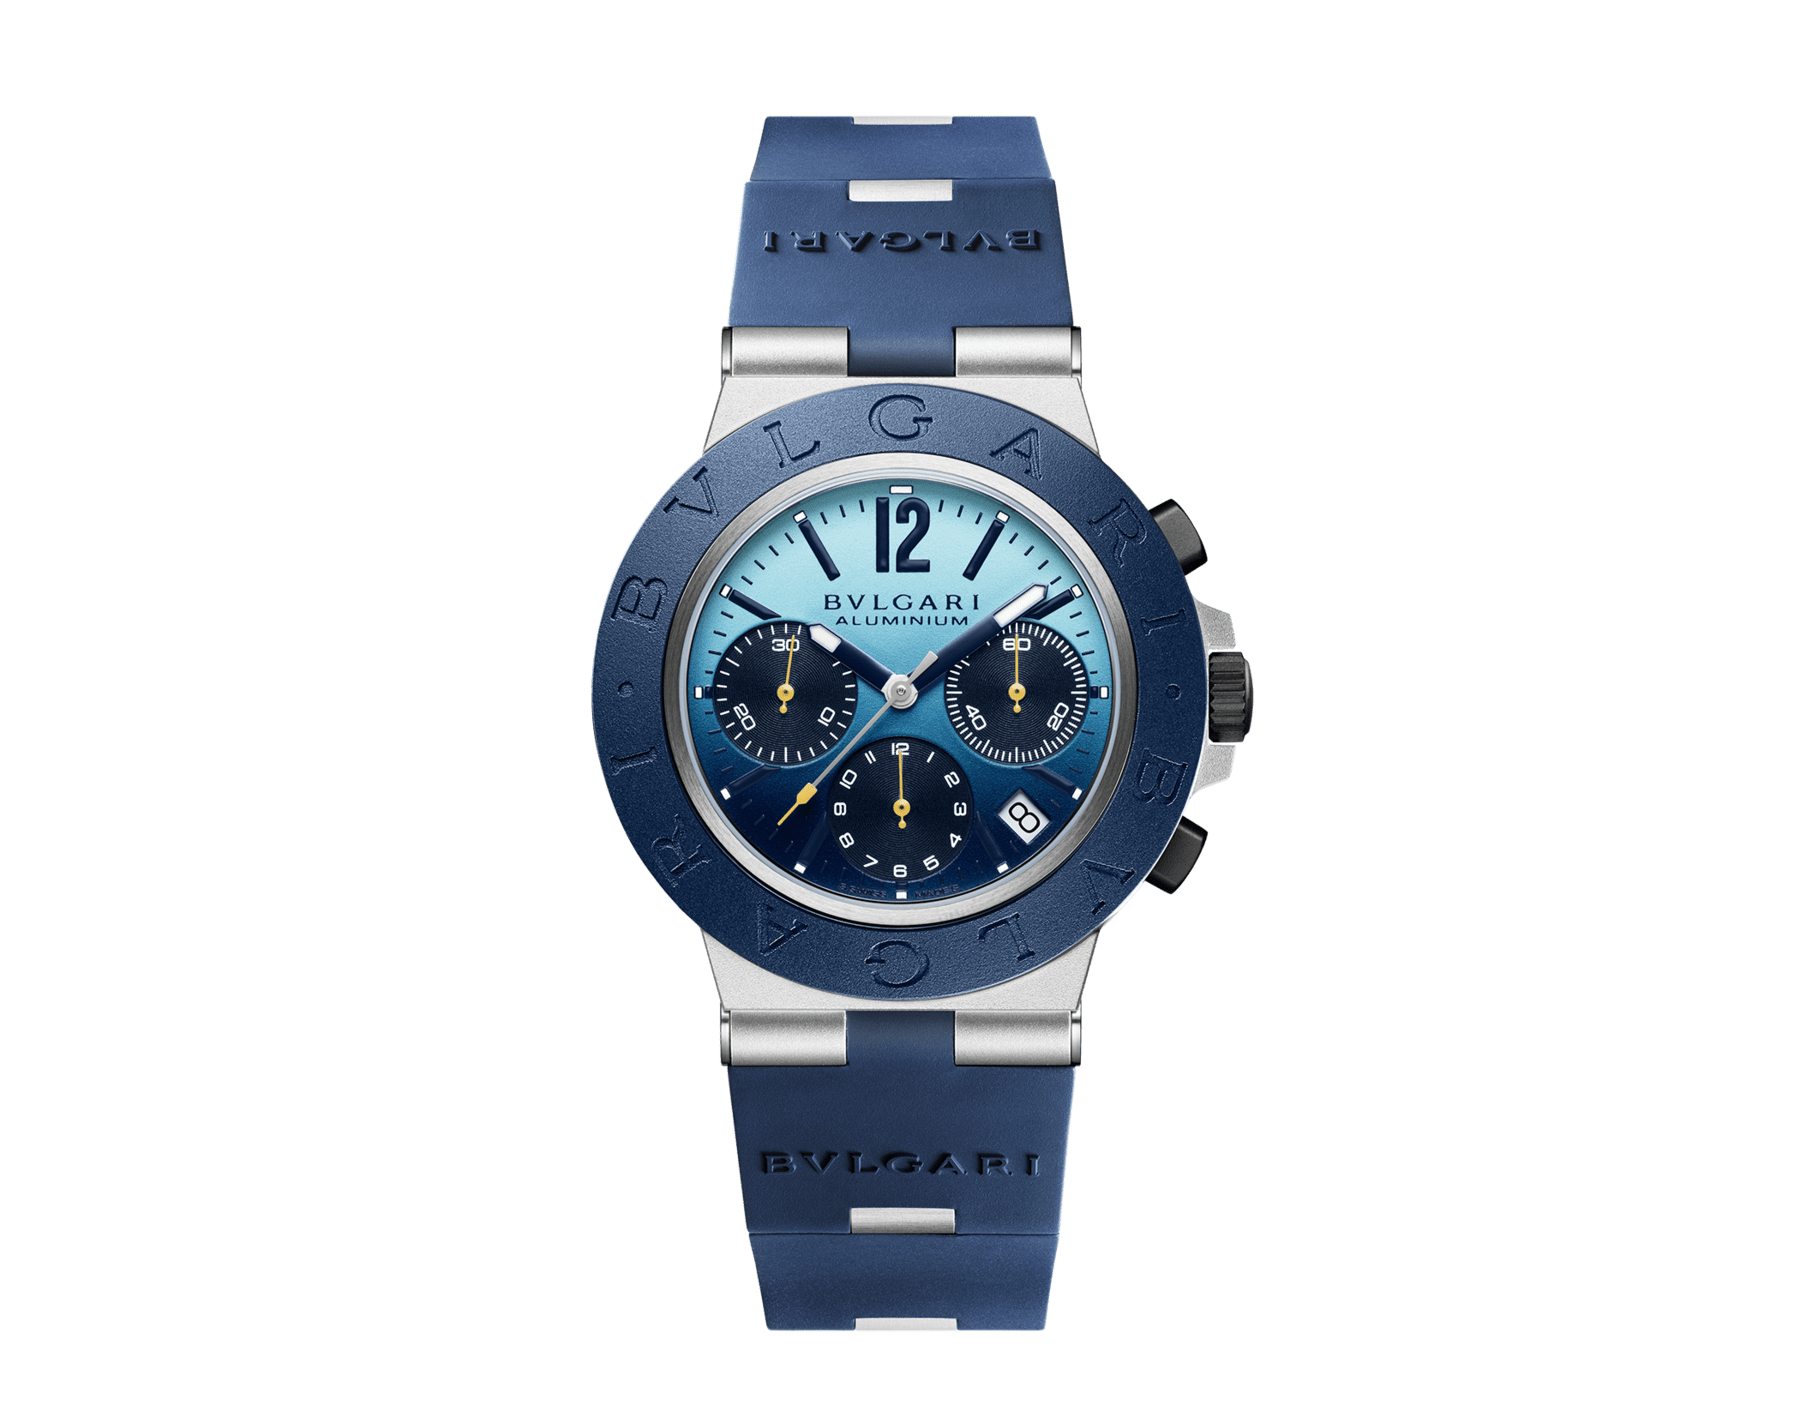 Bulgari Aluminium Capri Edition watch with mechanical manufacture movement, automatic winding, chronograph, 40 mm aluminium case, dark blue rubber bezel and bracelet, and blue shaded dial. Water-resistant up to 100 metres. Special Edition limited to 1,000 pieces 103844 image 1